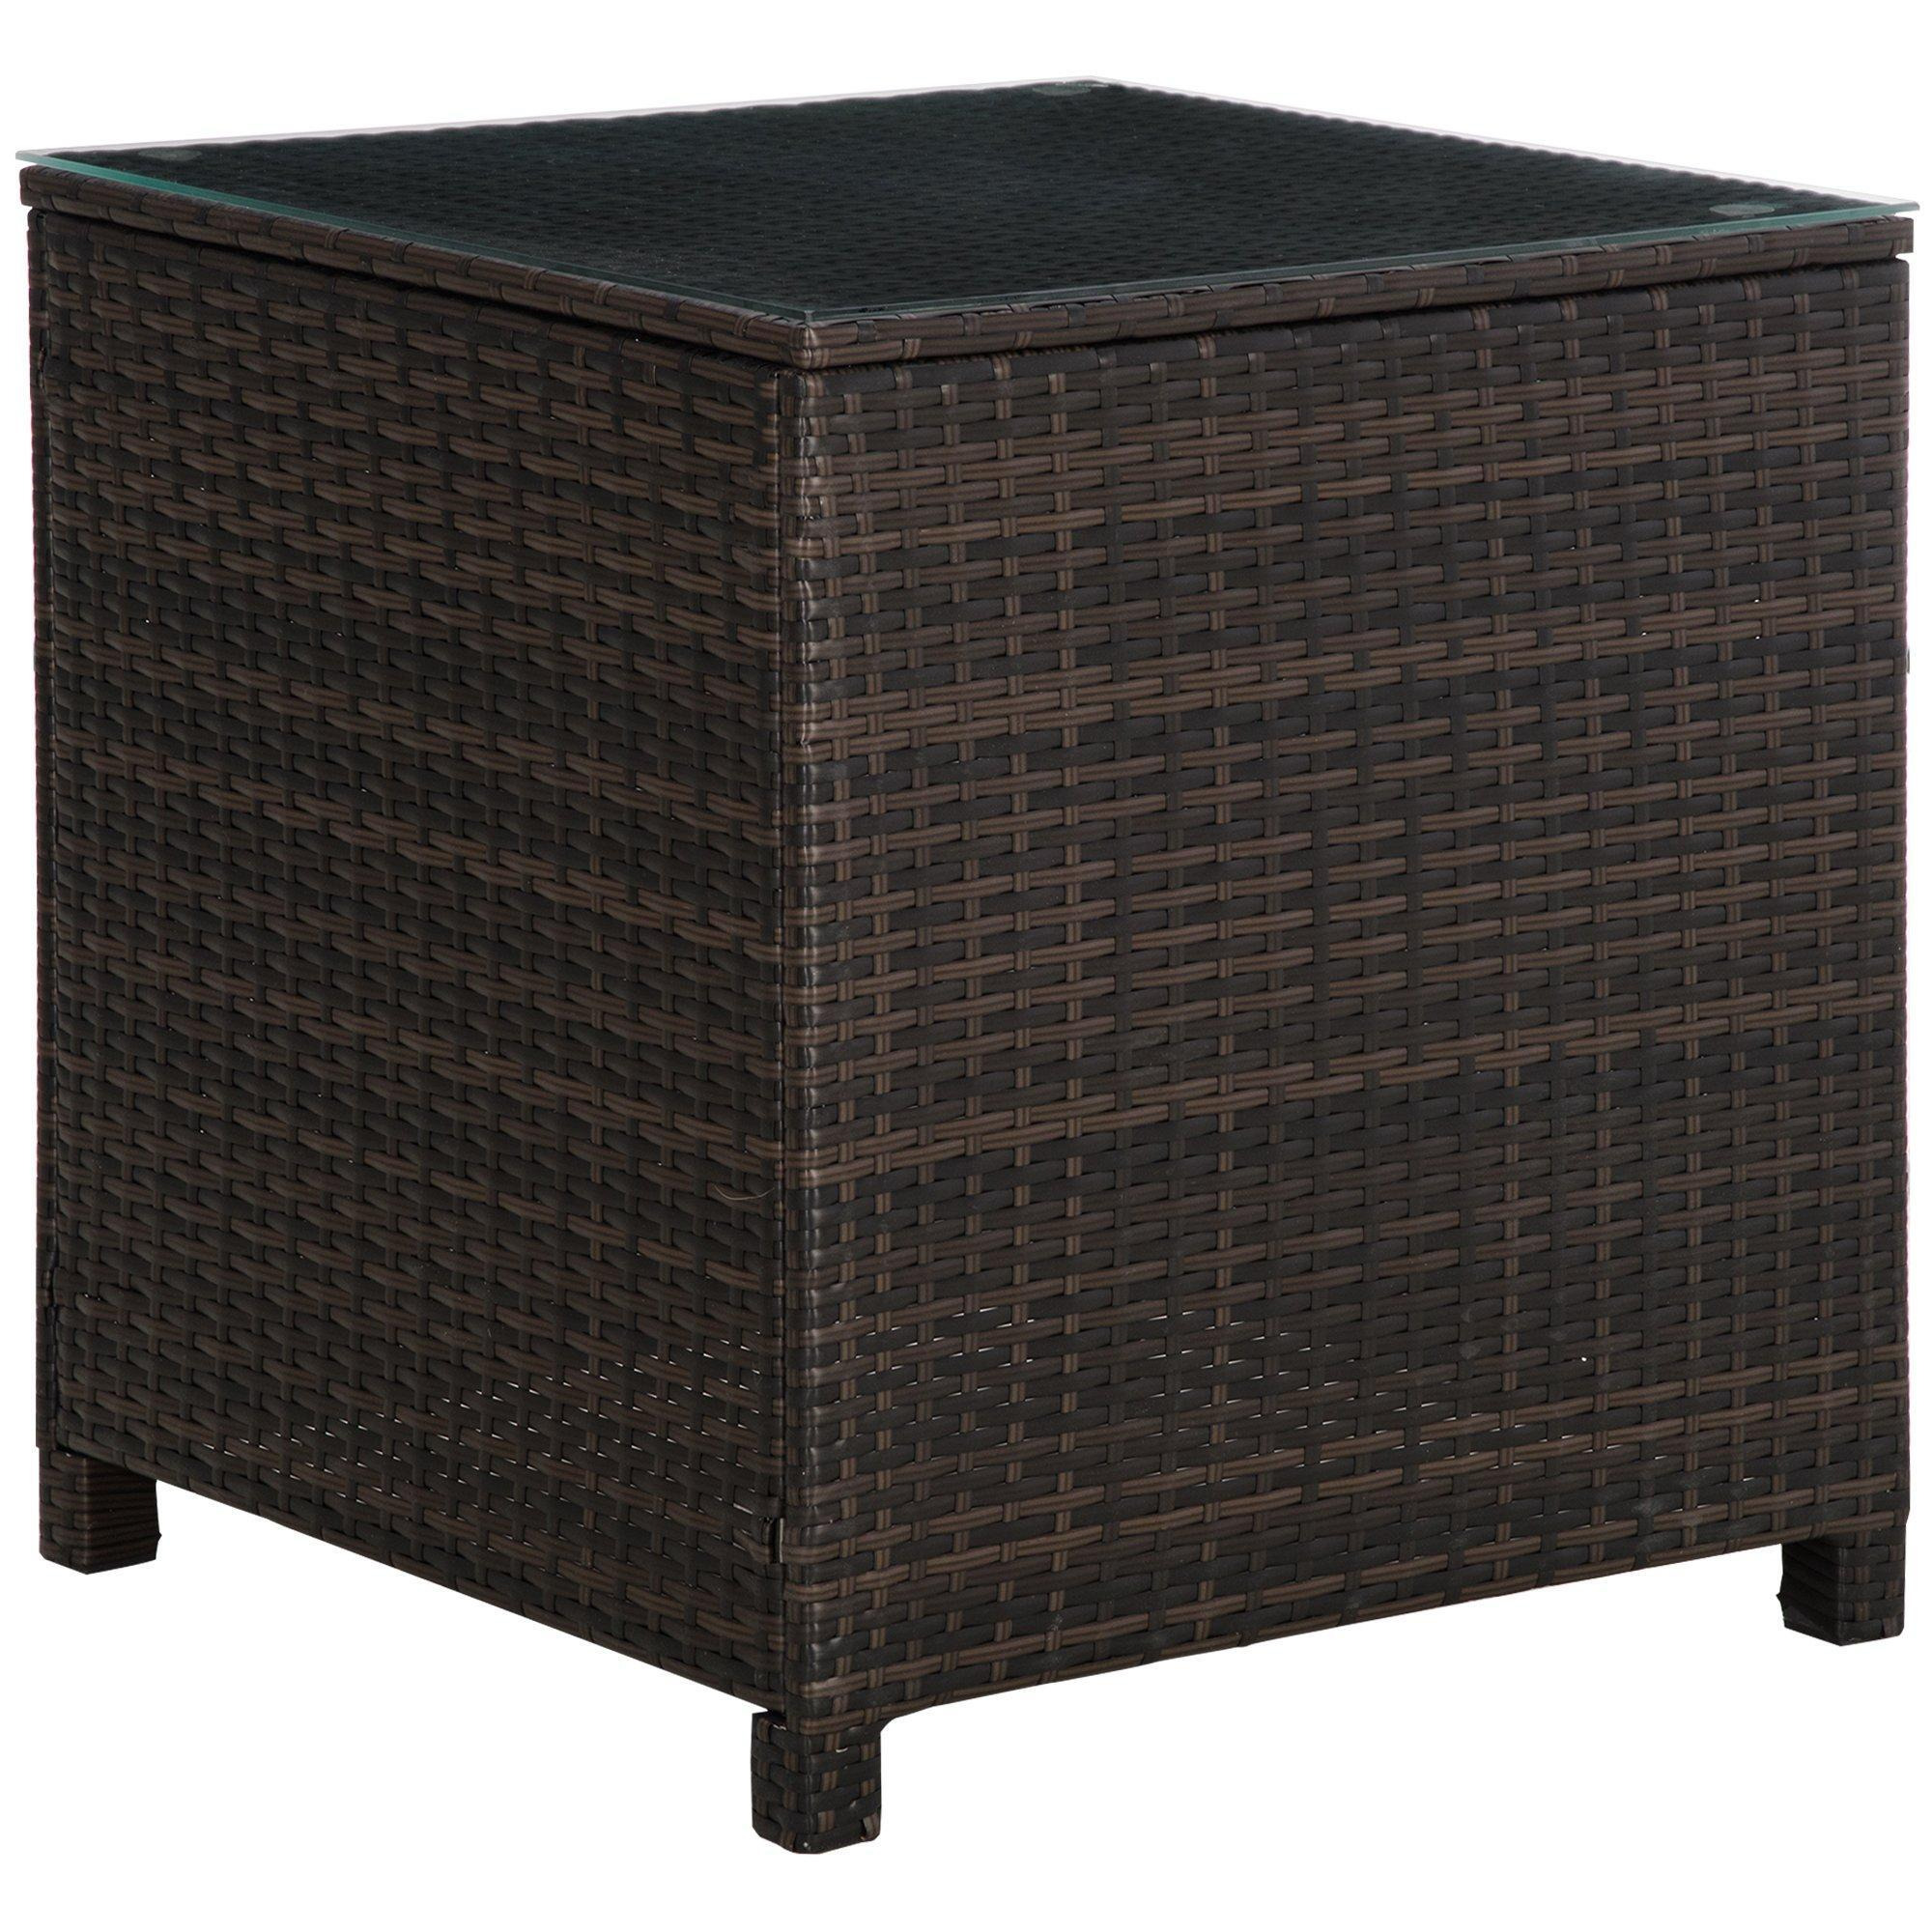 Rattan Garden Side Table Weave Wicker Patio Furniture with Tempered Glas - image 1